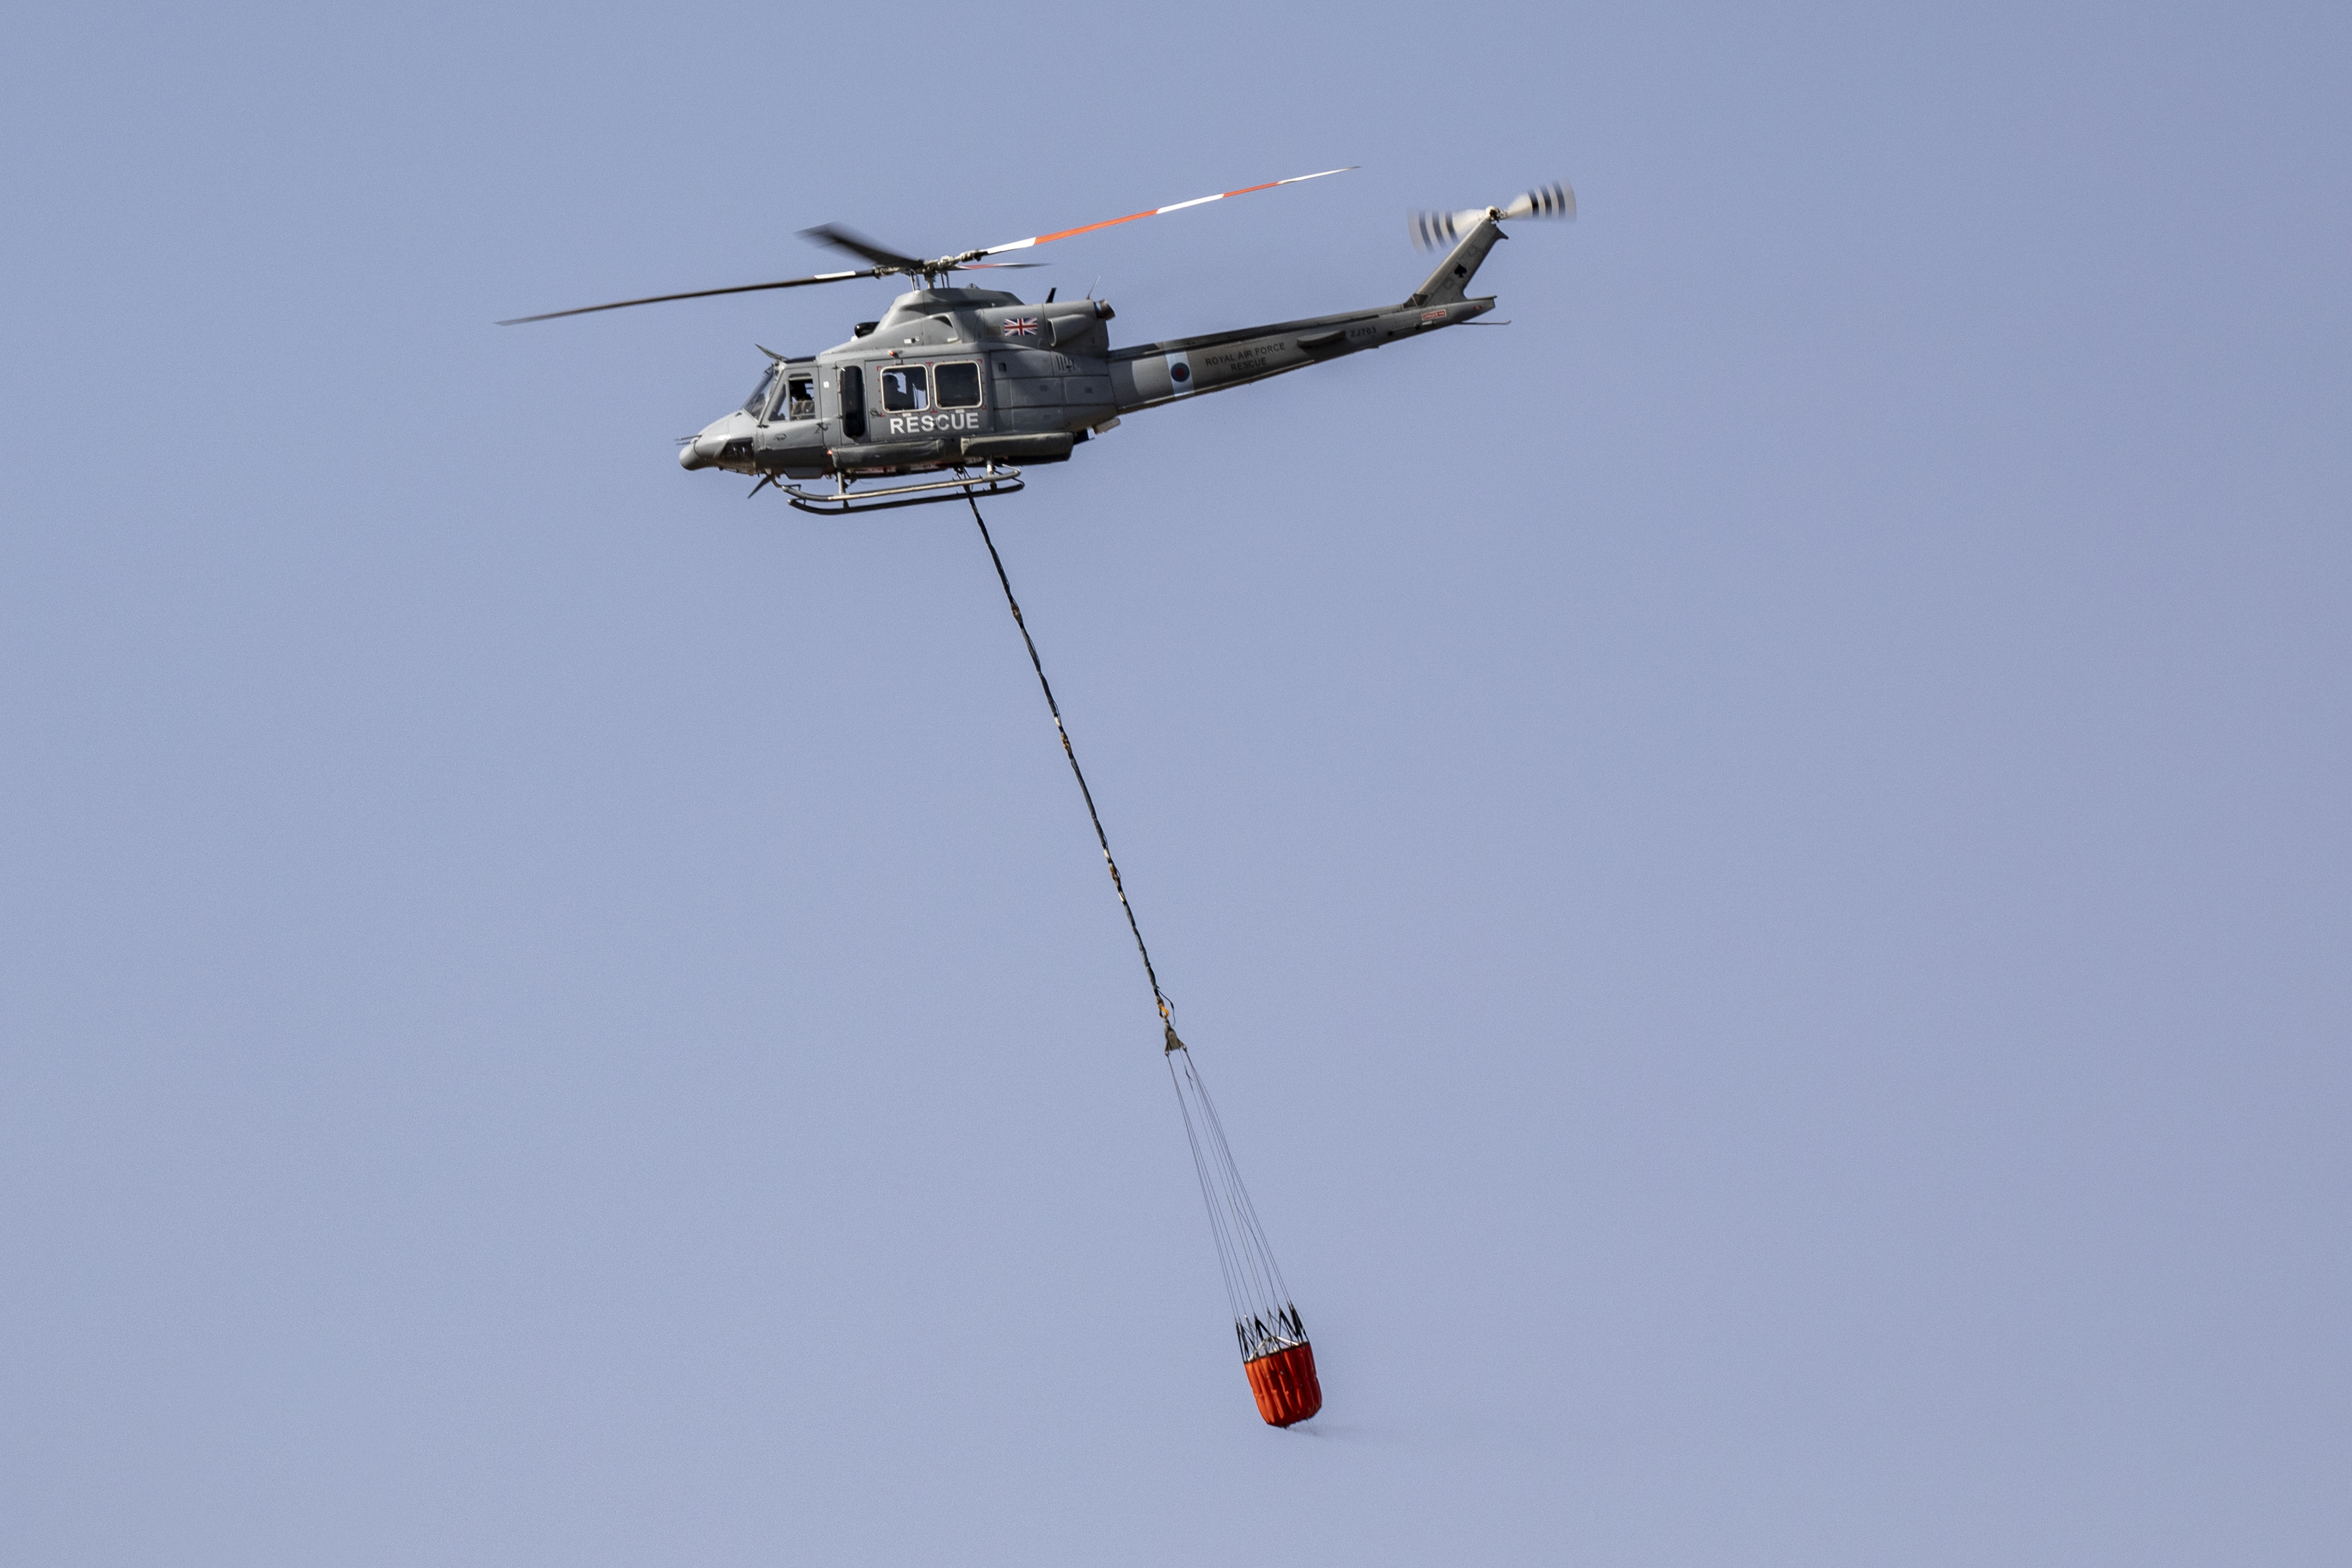 Image shows helicopter dropping water from under sling